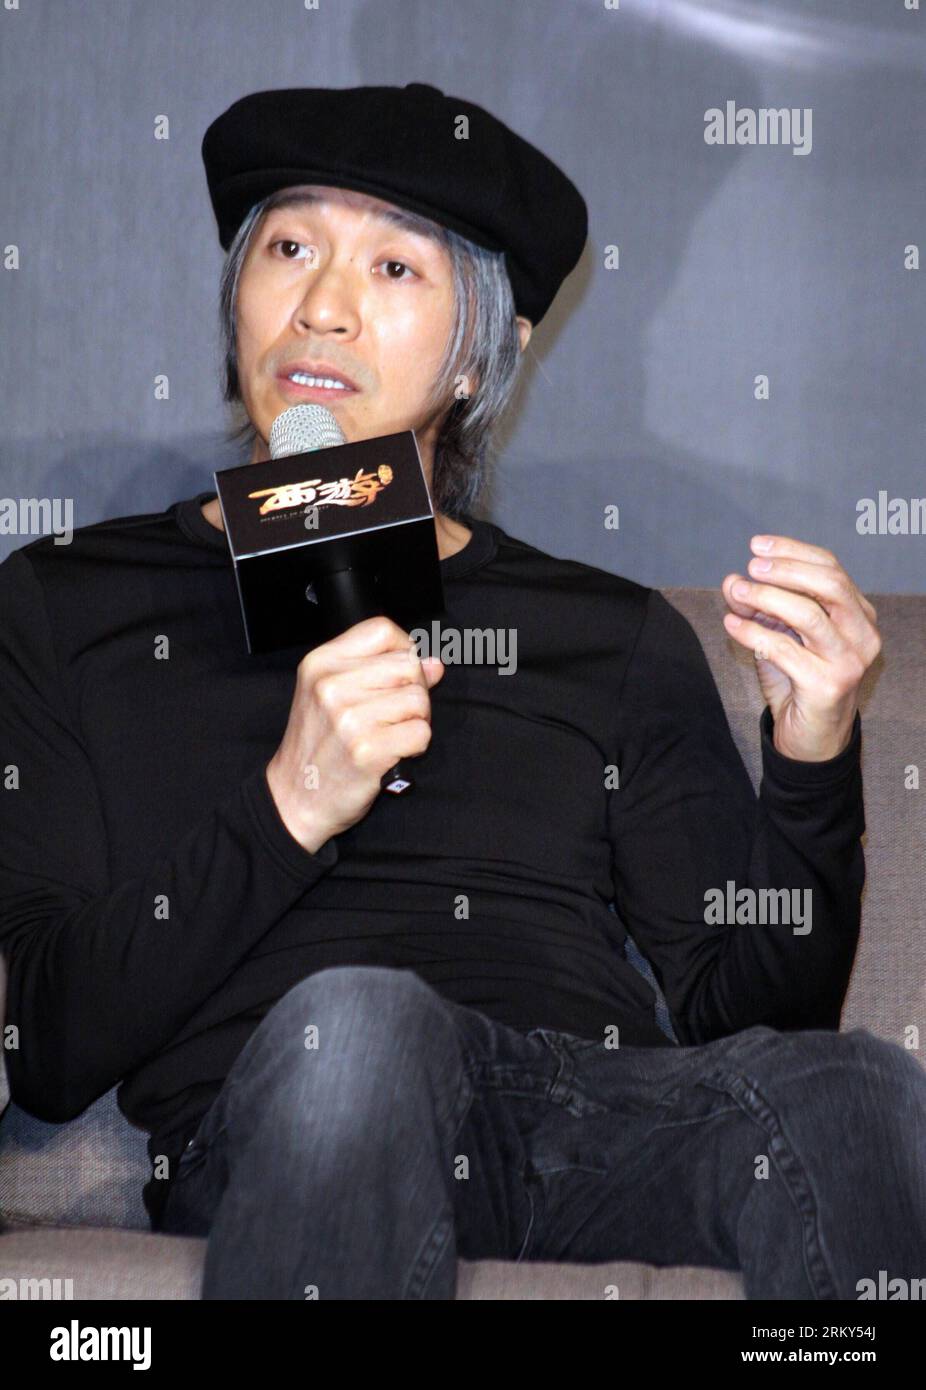 Bildnummer: 59146051  Datum: 28.01.2013  Copyright: imago/Xinhua (130128) -- TAIPEI, Jan. 28, 2013 (Xinhua) -- Director Stephen Chow receives interview during a press conference of the movie Journey to the West: Conquering the Demons in Taipei, southeast China s Taiwan, Jan. 28, 2013. The movie is expected to hit the screen on Feb. 7, 2013 in Taipei. (Xinhua) (mp) CHINA-TAIPEI-MOVIE-PRESS CONFERENCE (CN) PUBLICATIONxNOTxINxCHN Entertainment Kultur People PK Film Premiere Filmpremiere Die Reise nach Westen x0x xdd 2013 hoch premiumd      59146051 Date 28 01 2013 Copyright Imago XINHUA  Taipei J Stock Photo